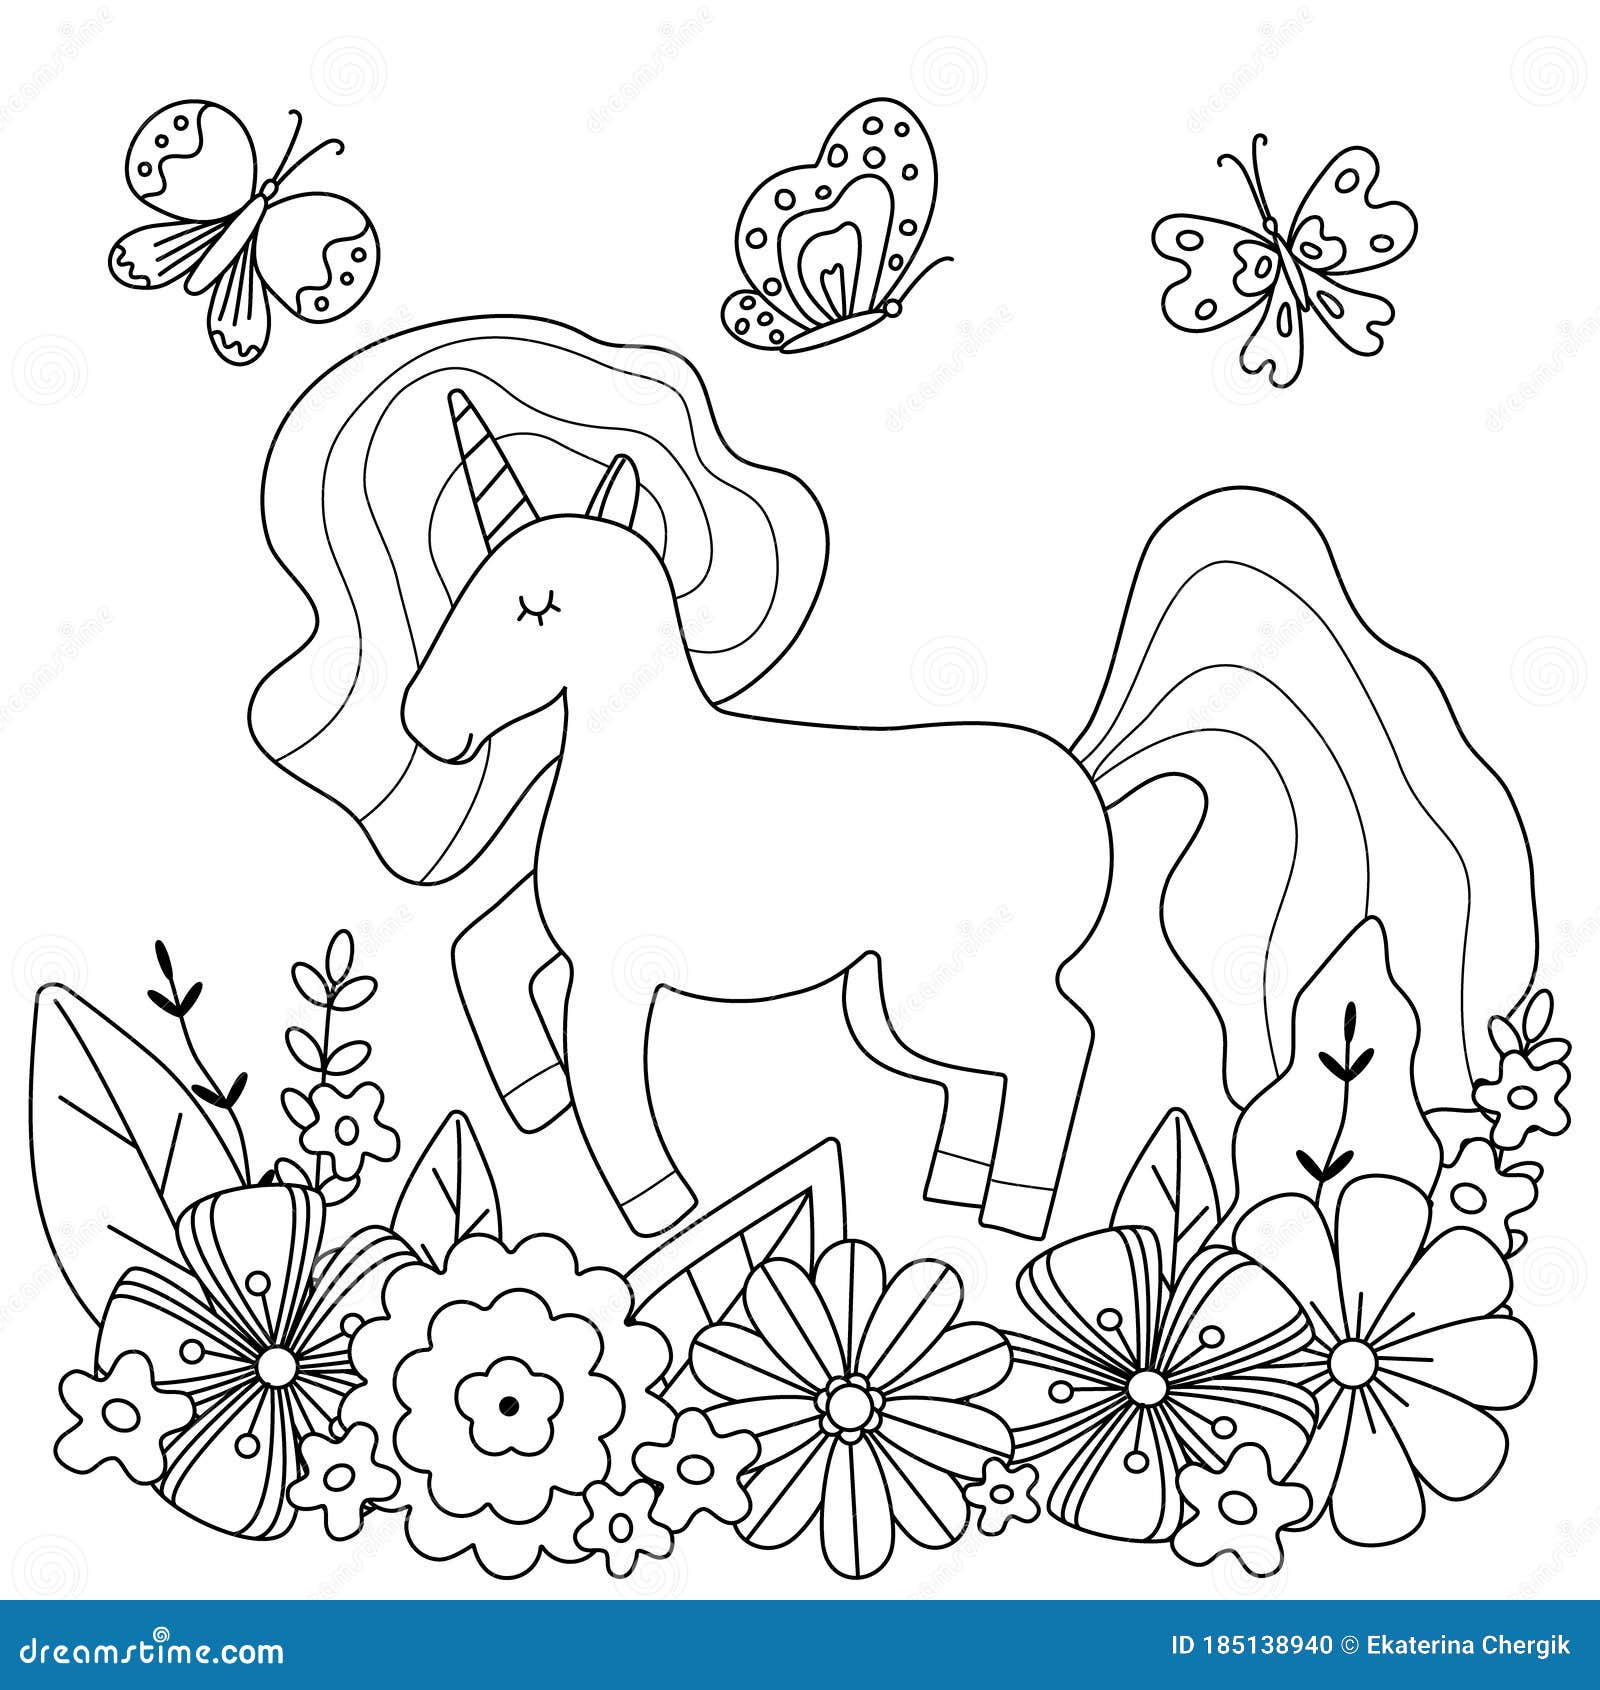 Kids Coloring Page with Cute Unicorn and Flowers. Stock Vector